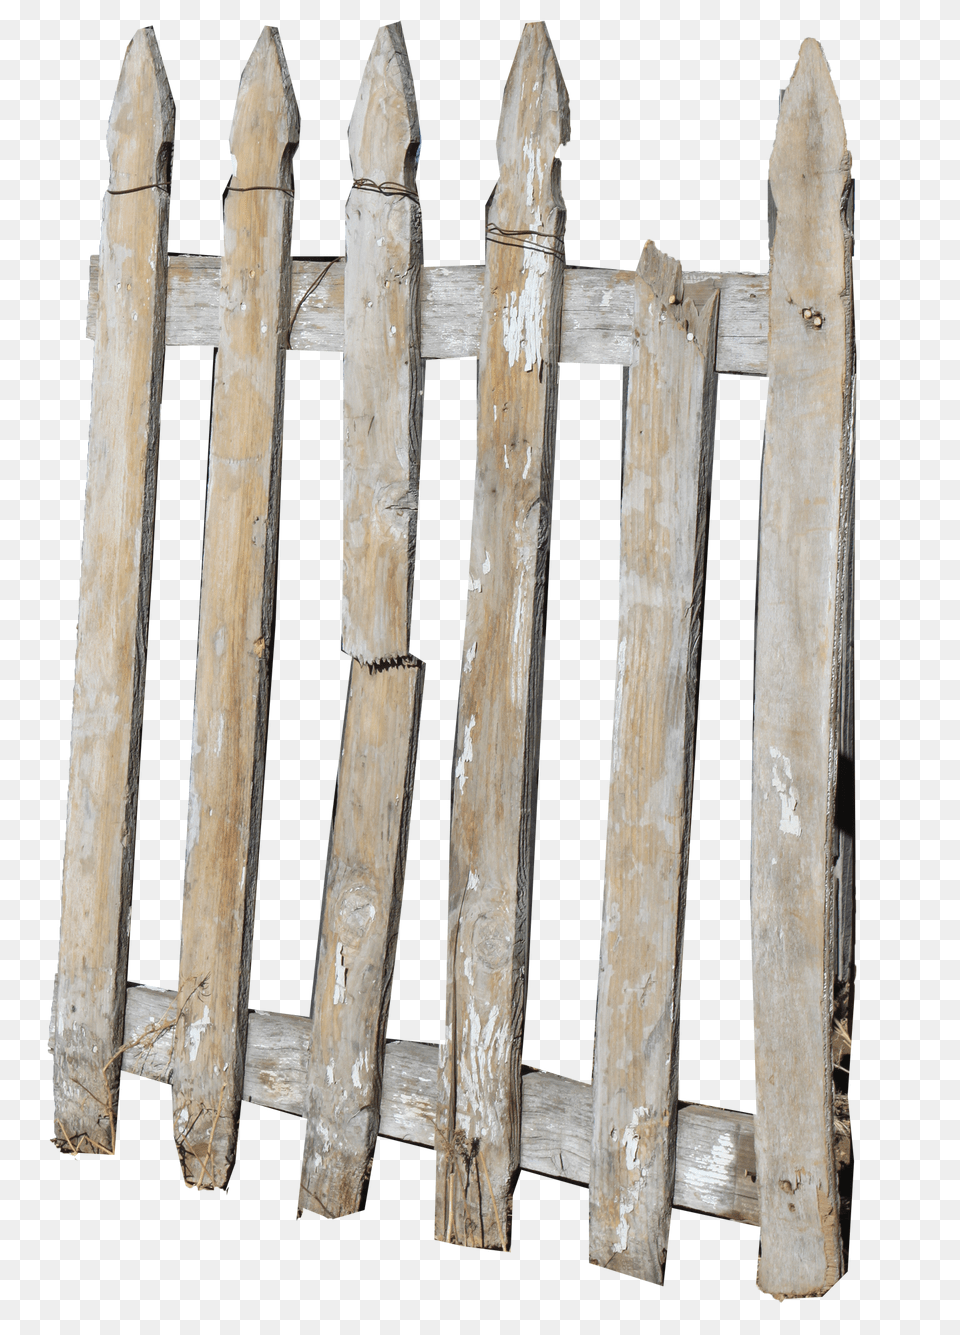 Totally High Res Rustic Wooden Textures And Graphic Elements, Fence, Picket, Nature, Outdoors Free Png